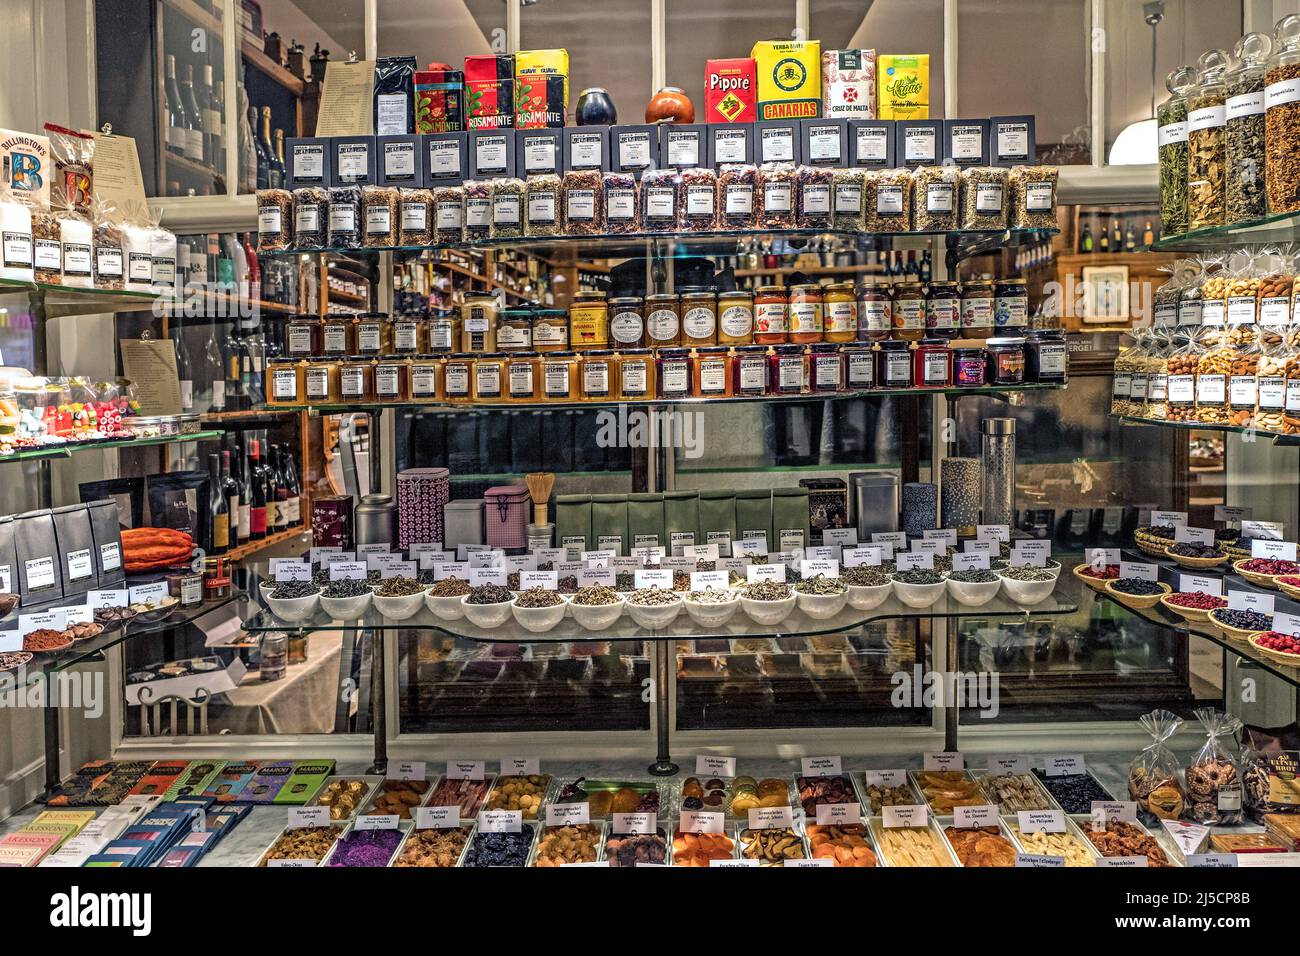 Switzerland, Zuerich 29.11.2019. Delicatessen Schwarzenbach in the old town of Zuerich on 29.11.2019. The traditional grocery store H. Schwarzenbach in Zuerich Oberdorf was founded in 1864 by Heinrich Schwarzenbach I.. The delicatessen is still run by the Schwarzenbach family, today already in the fifth generation. [automated translation] Stock Photo